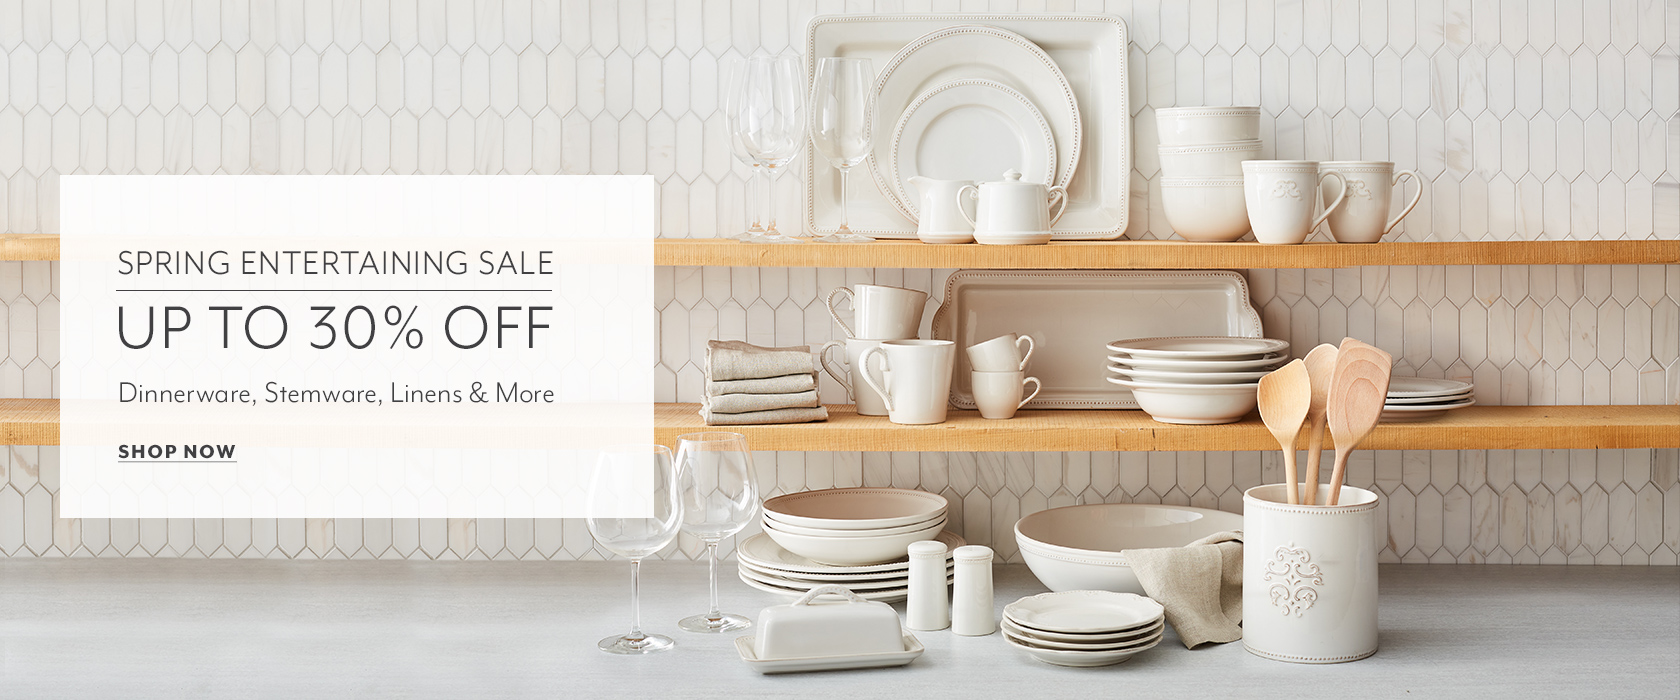 Spring Entertaining Sale up to 30% off dinnerware, stemware, linens & more. Shop Now.